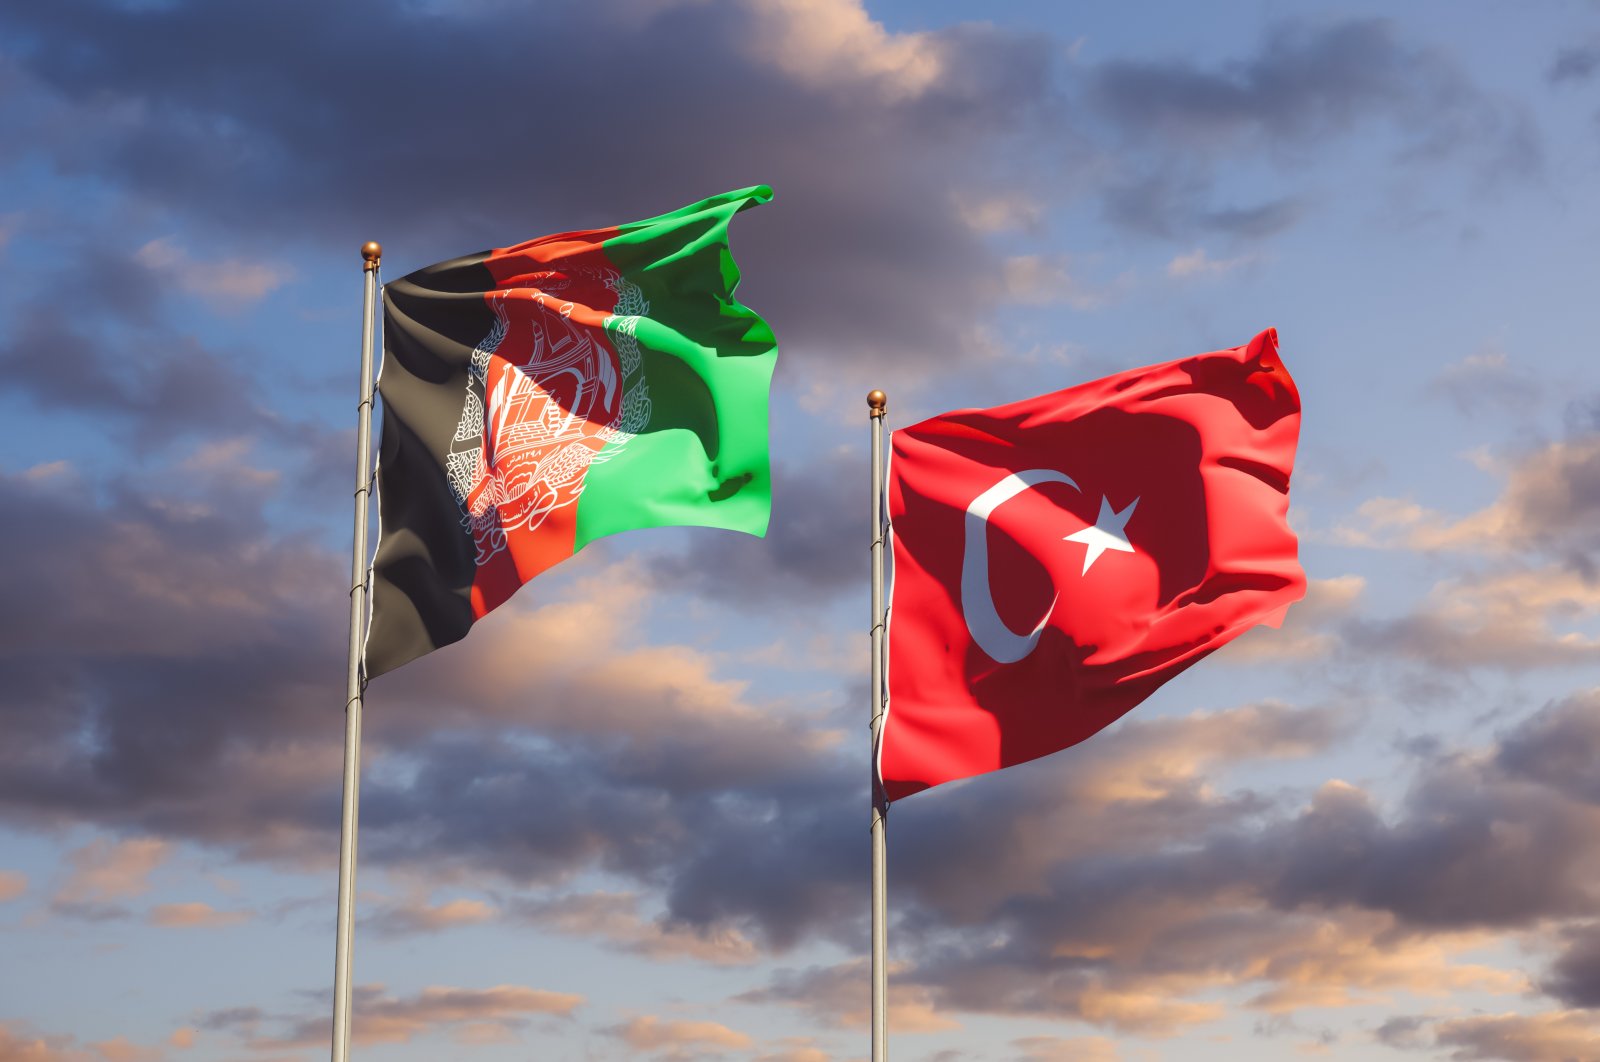 The flags of Afghanistan and Turkey. (Photo by Shutterstock)